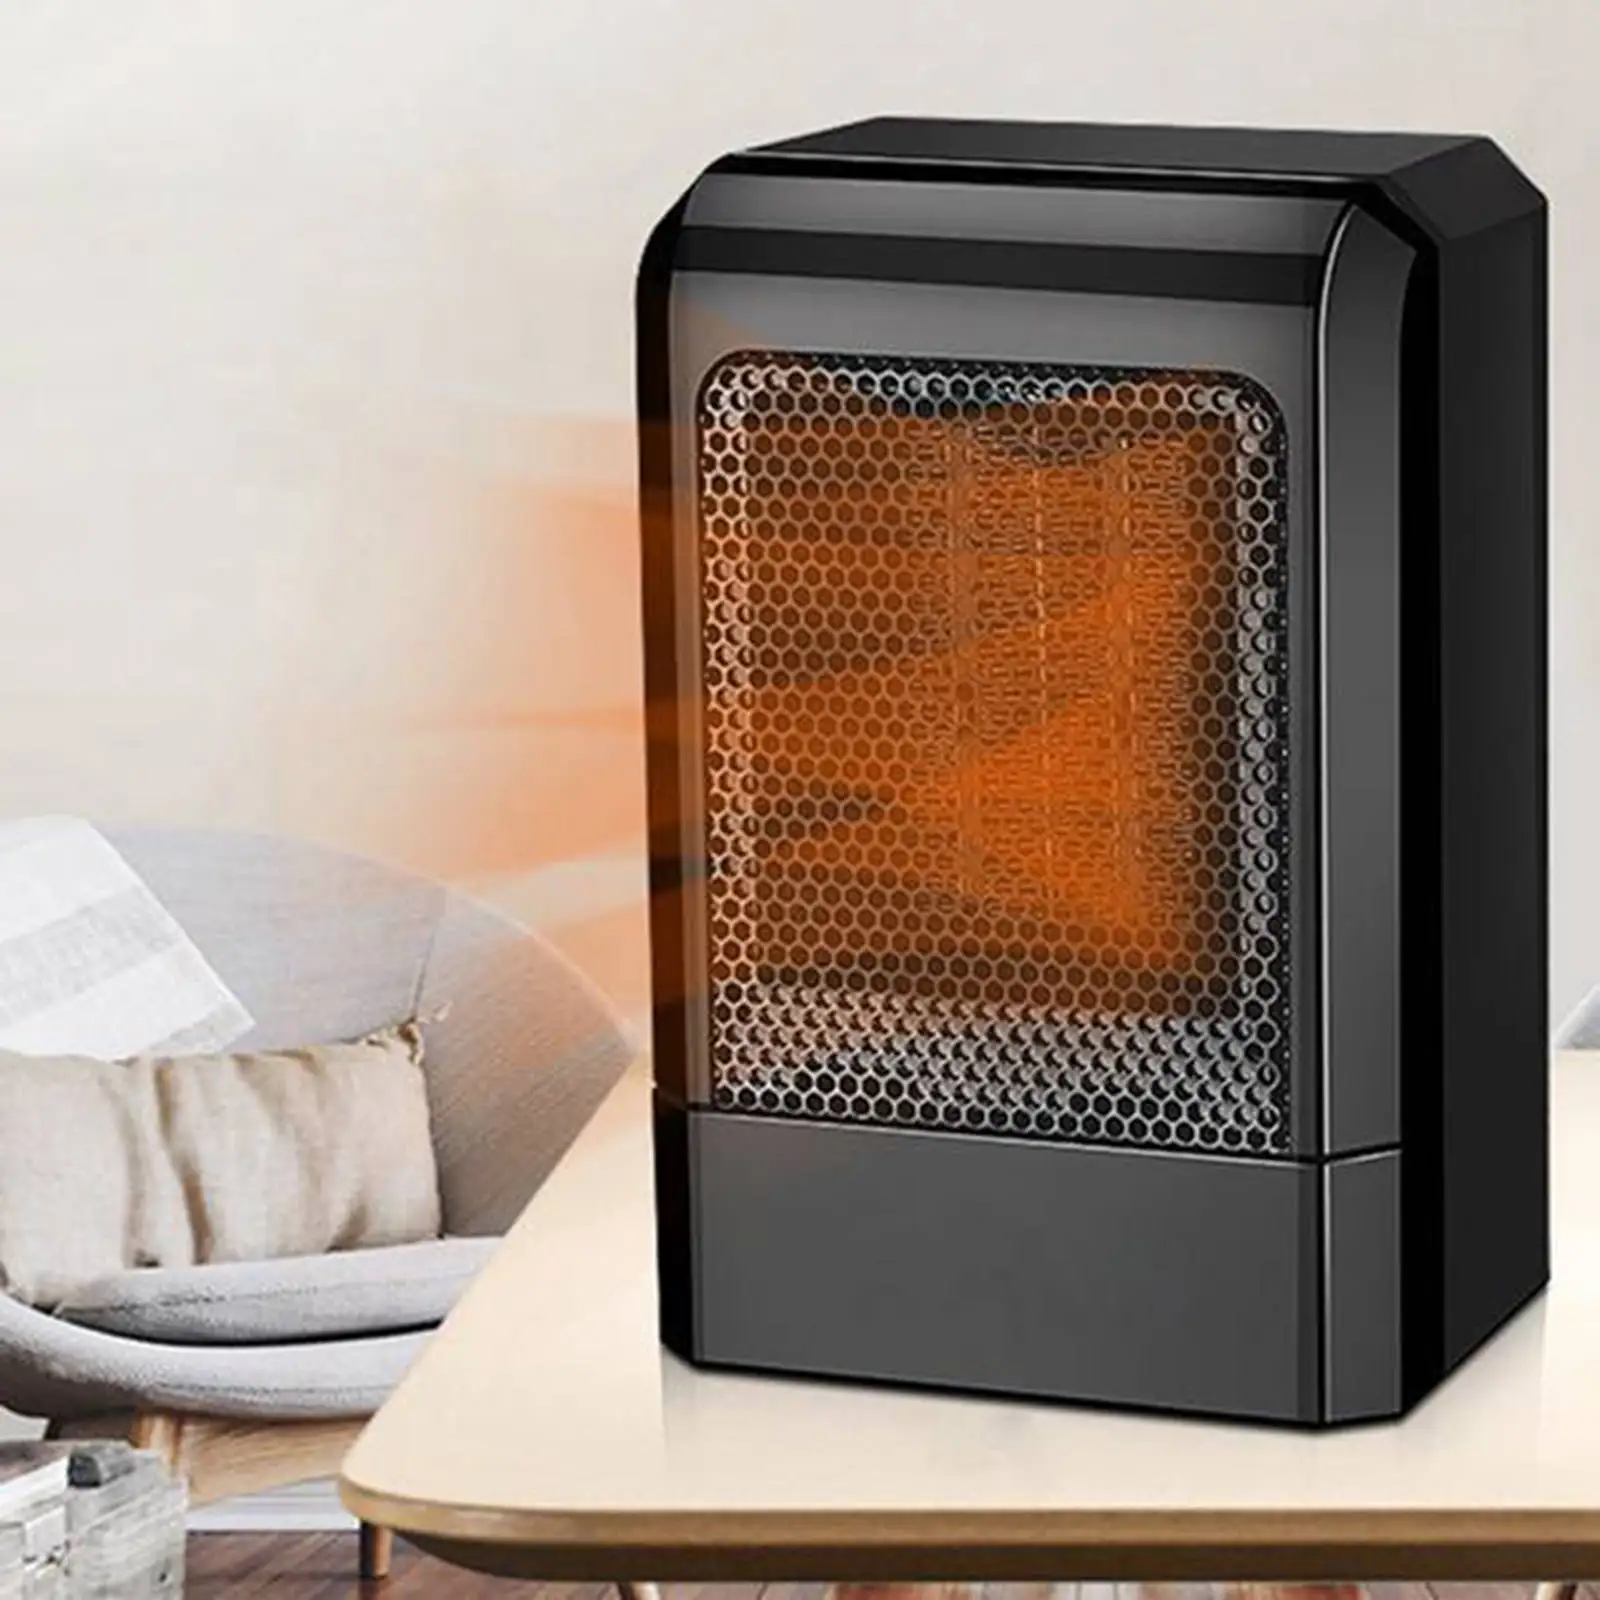 500W Mini Ceramic Electric Heater Home Office Space Heating Portable Fan Silent Winter Warm Keeping Equipment